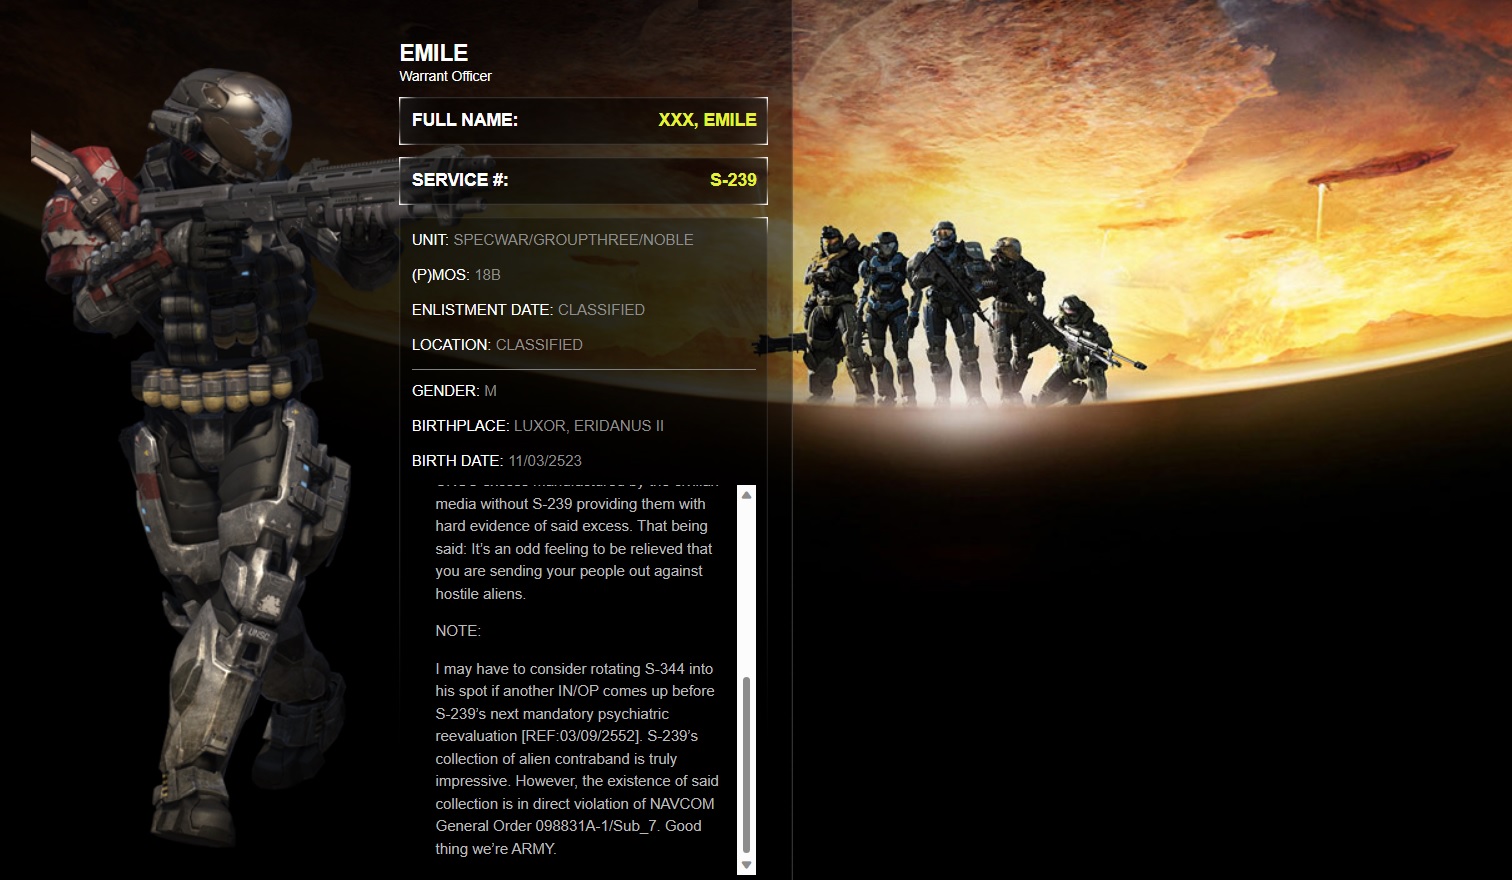 Halo: Reach page of Emile-A239 on Bungie.net mentioning Rosenda